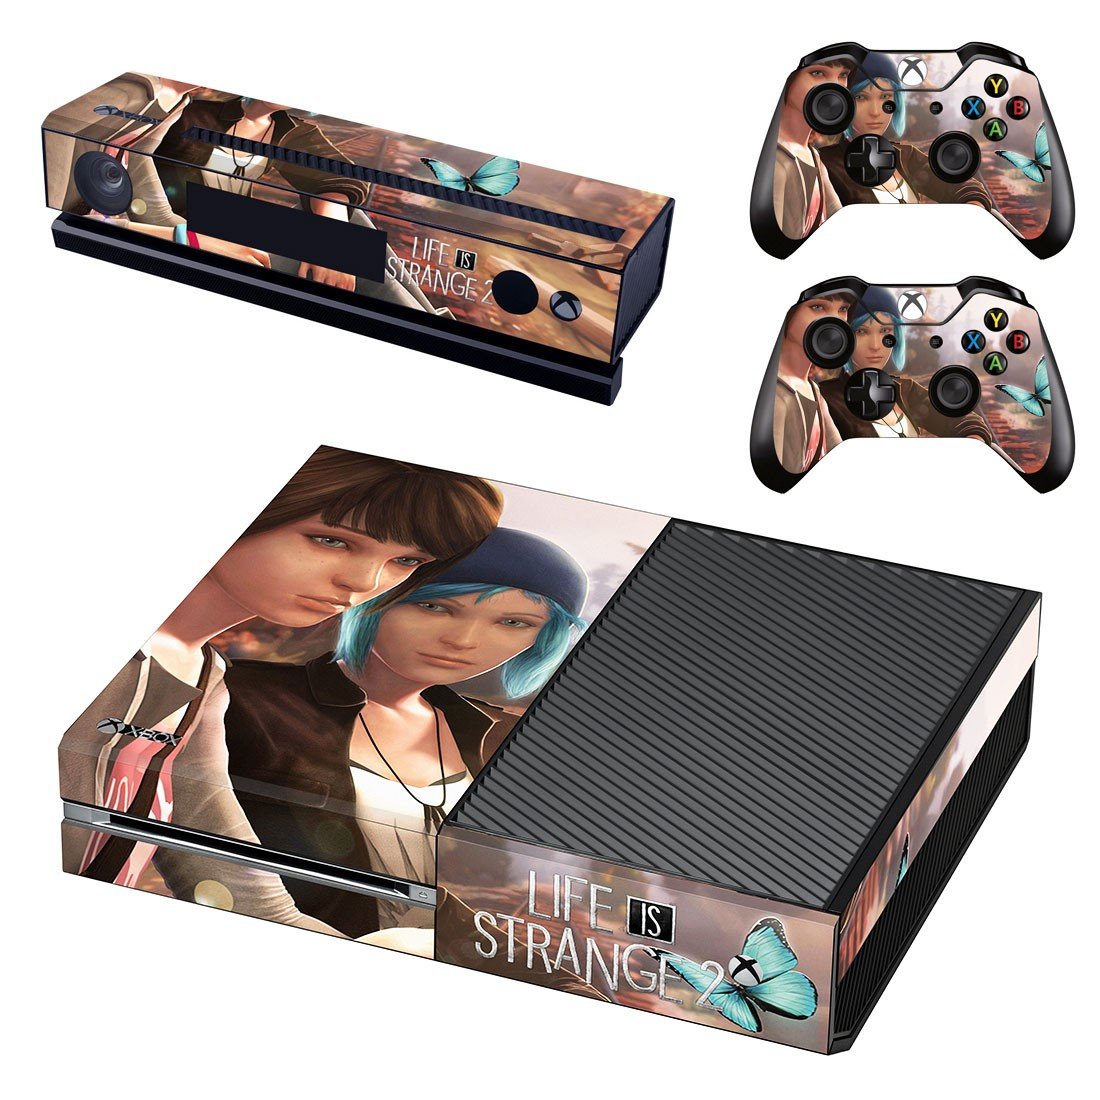 Xbox One And Controllers Skin Cover Life is Strange 2 Design 1